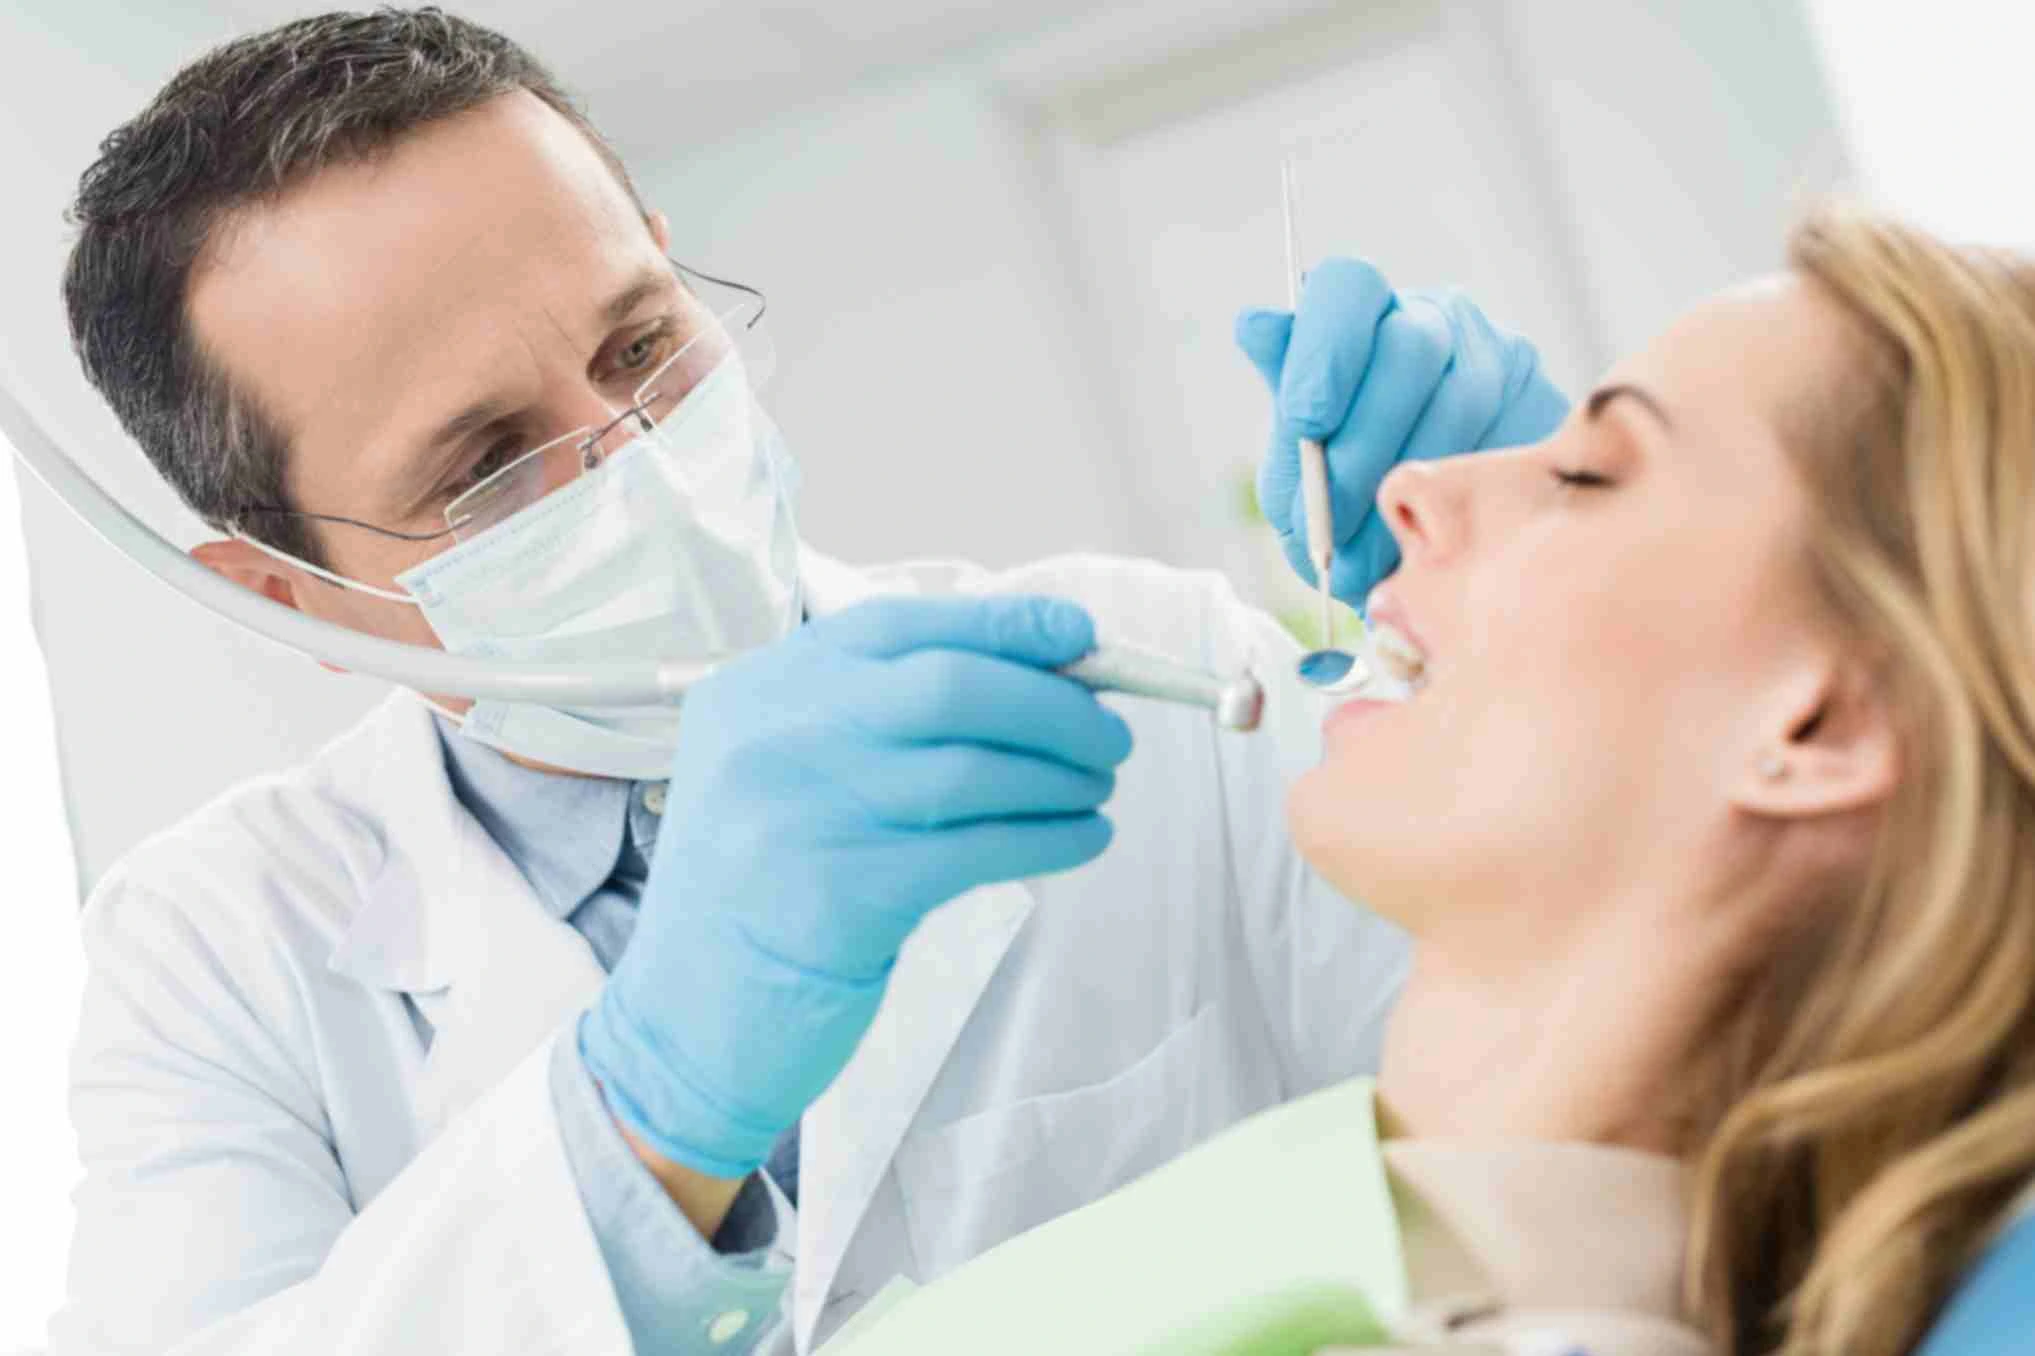 Treatment of oral teeth at access dental center